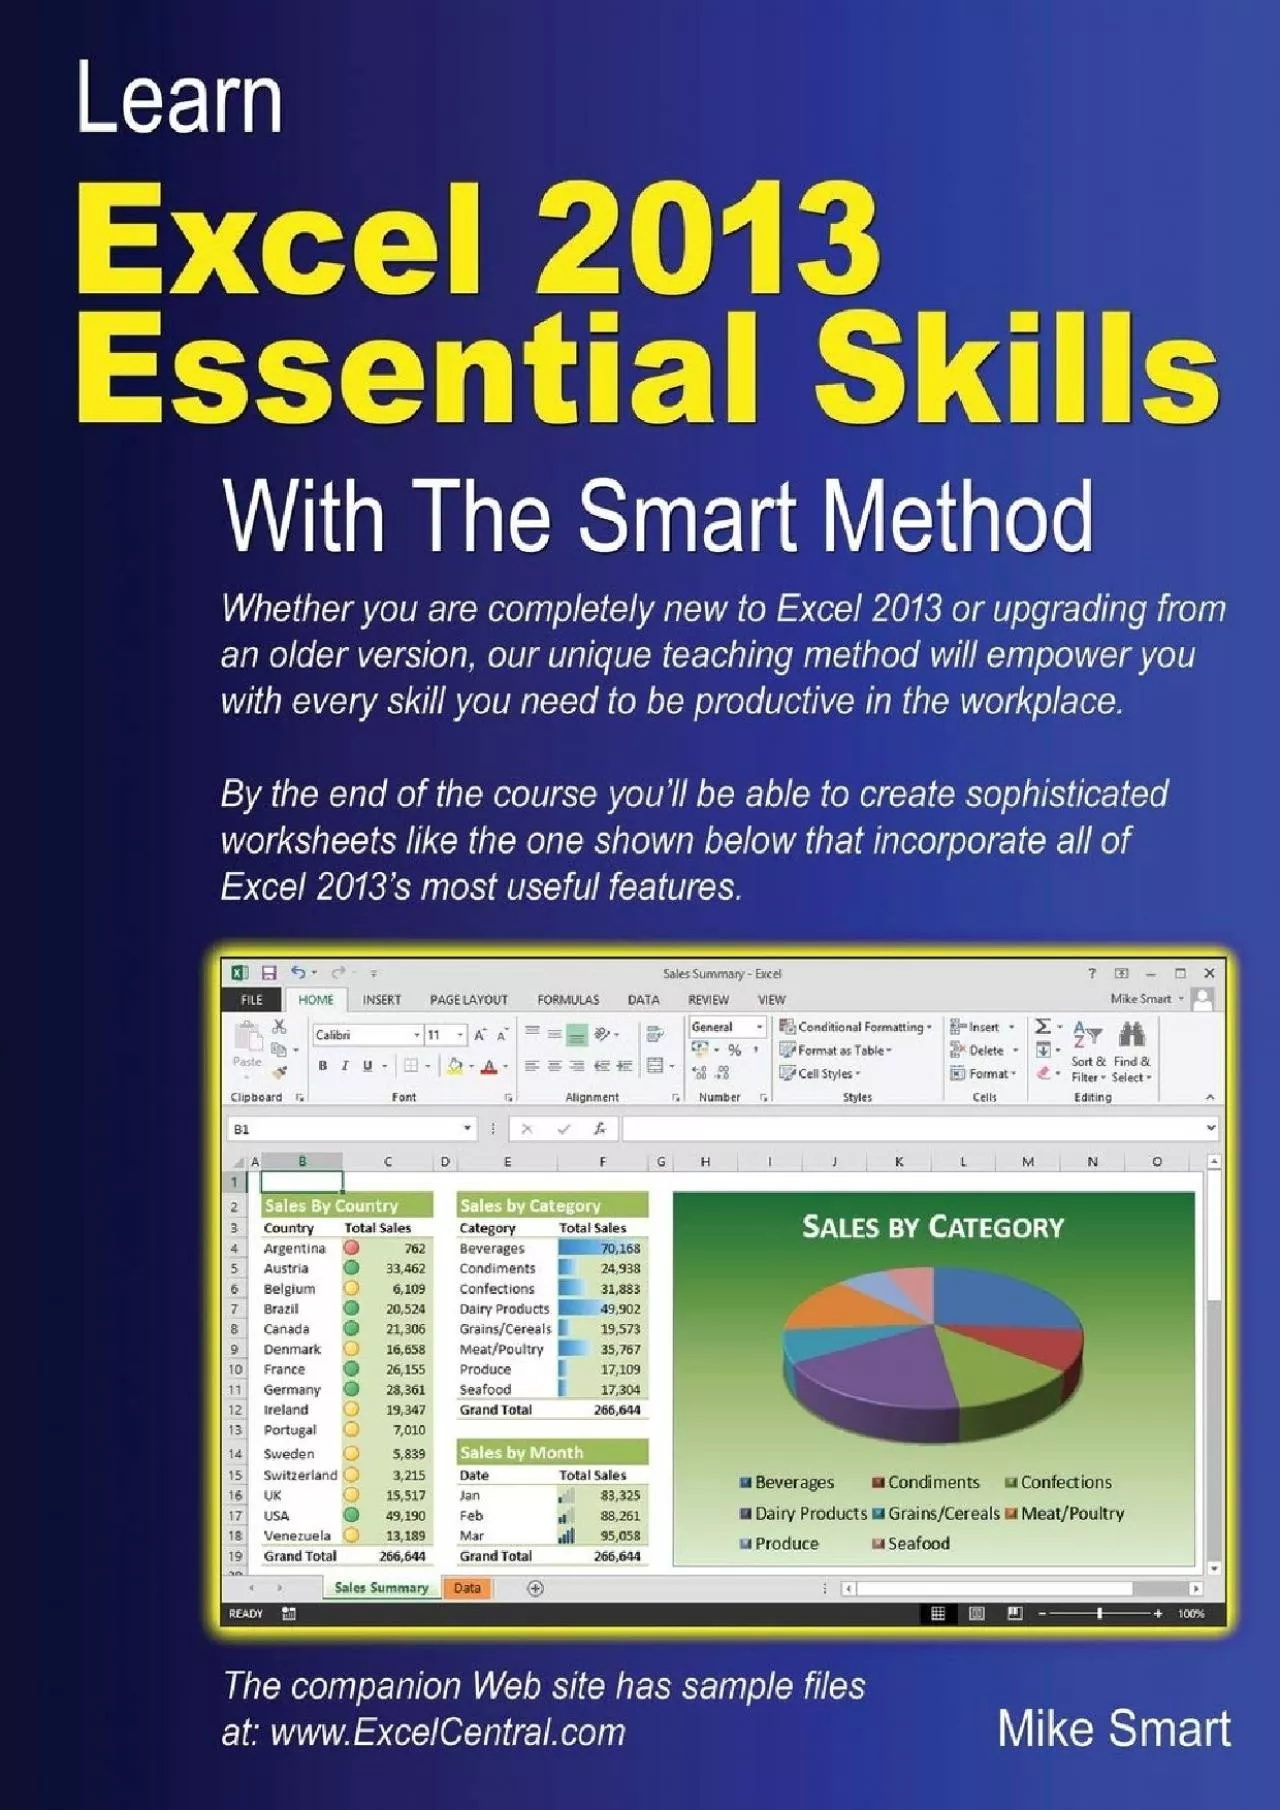 Learn Excel 2013 Essential Skills with The Smart Method: Courseware tutorial for self-instruction